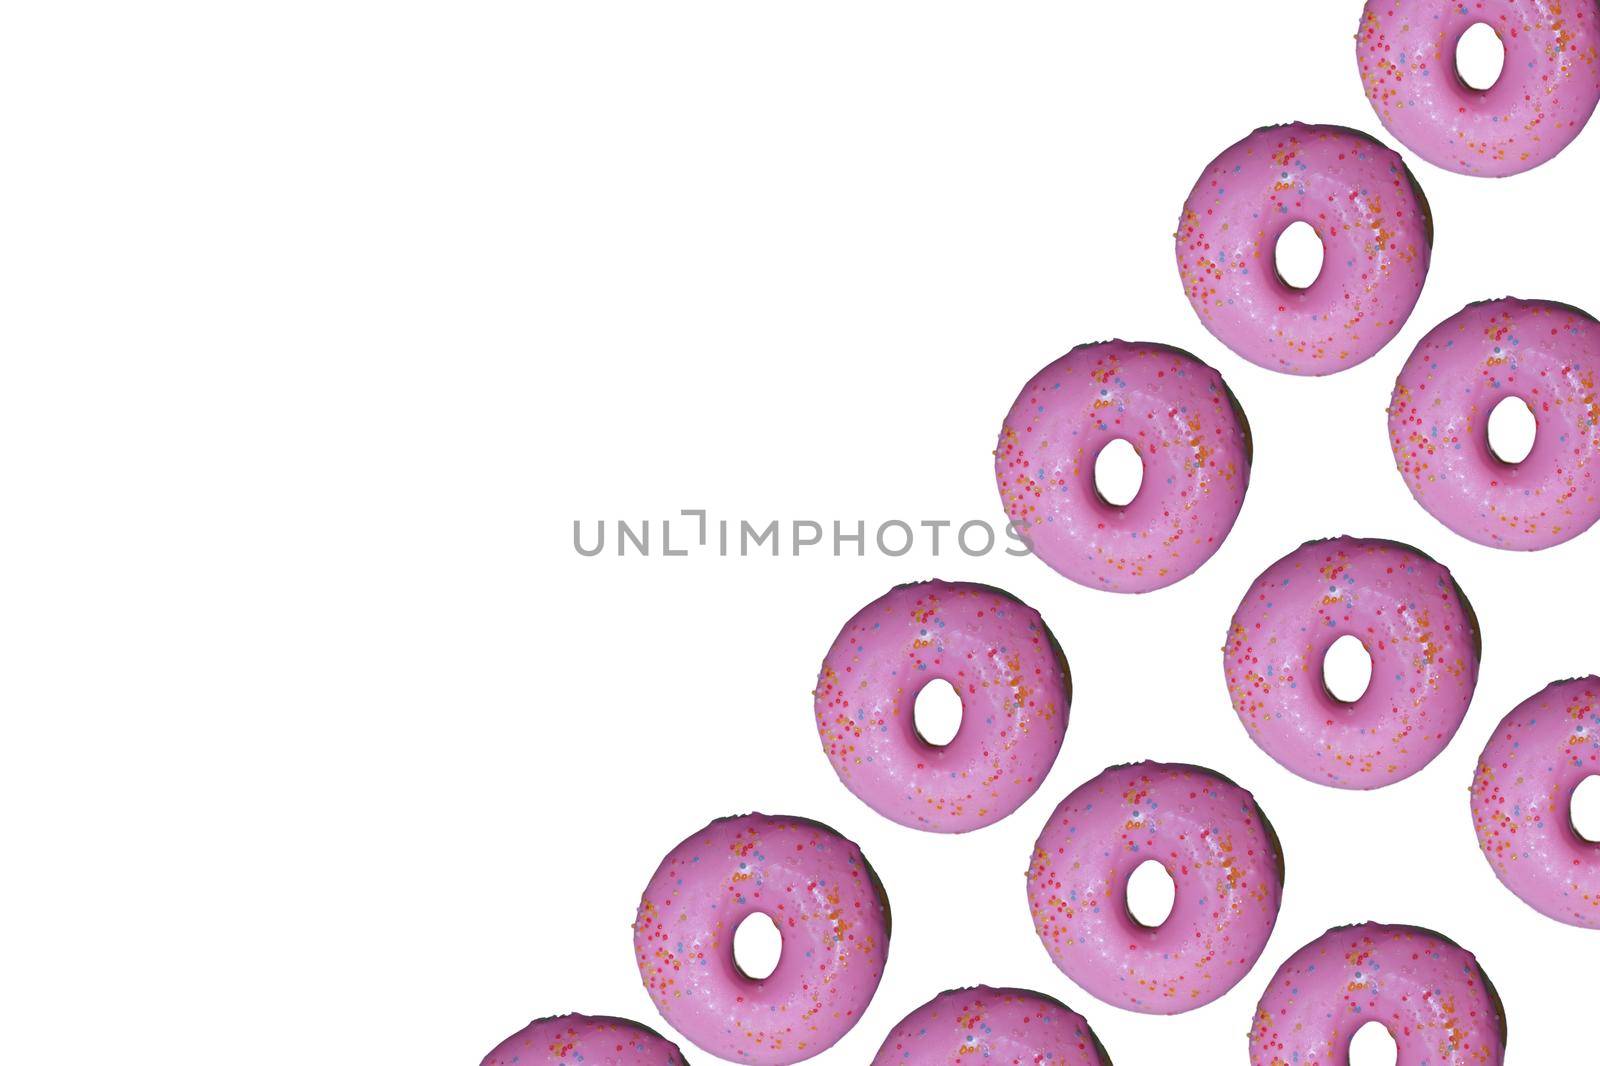 Donut pattern lay flat on isolated white background, top view.